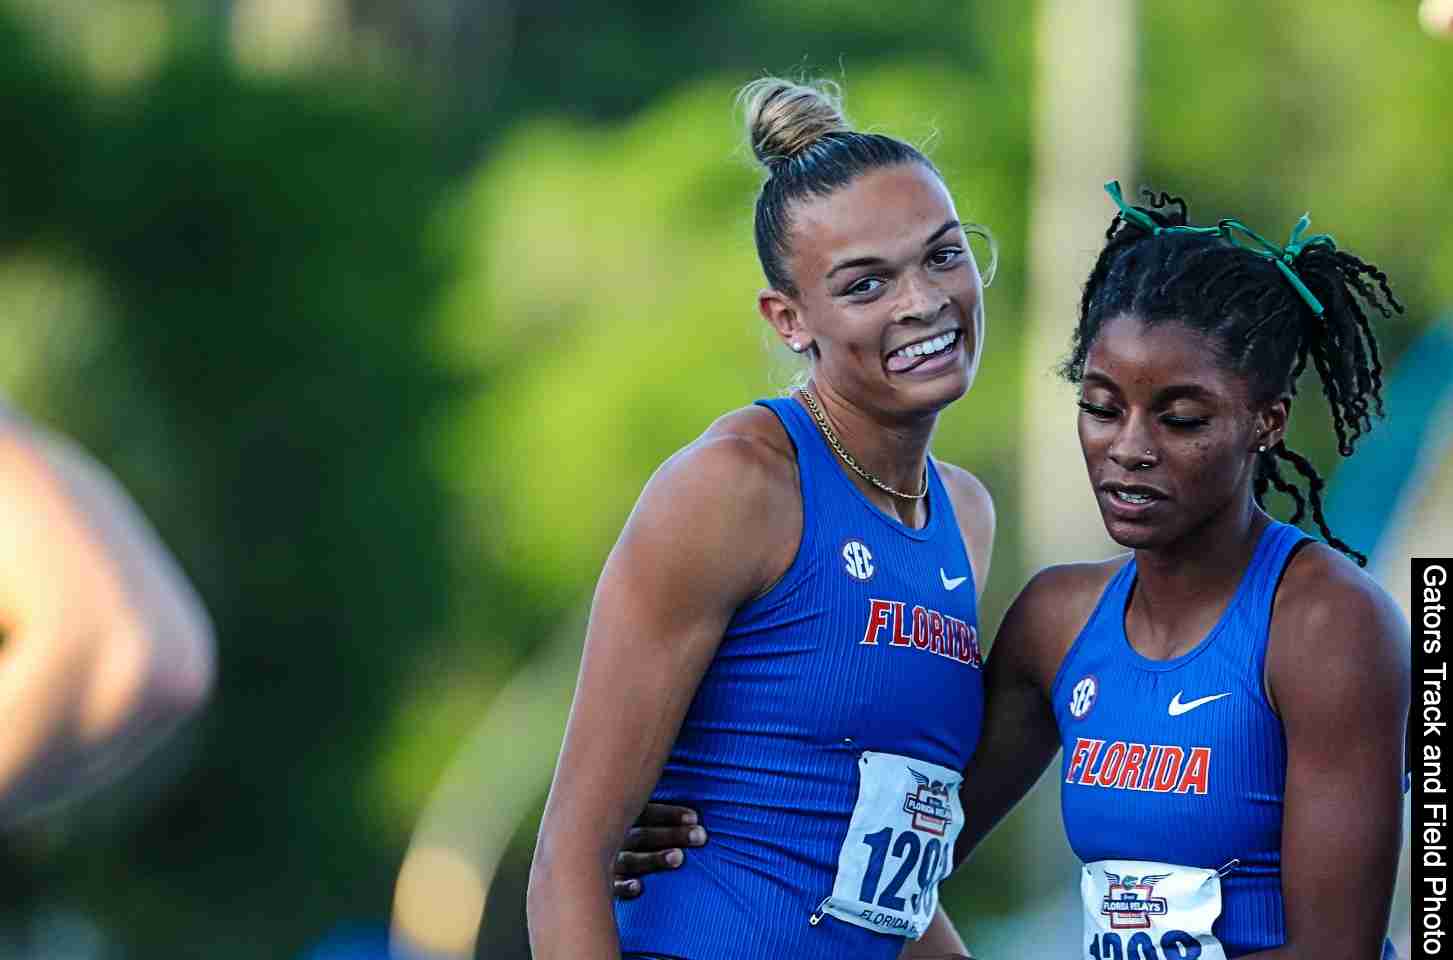 Pepsi Florida Relays 2022 Day 1: School record from Anna Hall in 400m hurdles